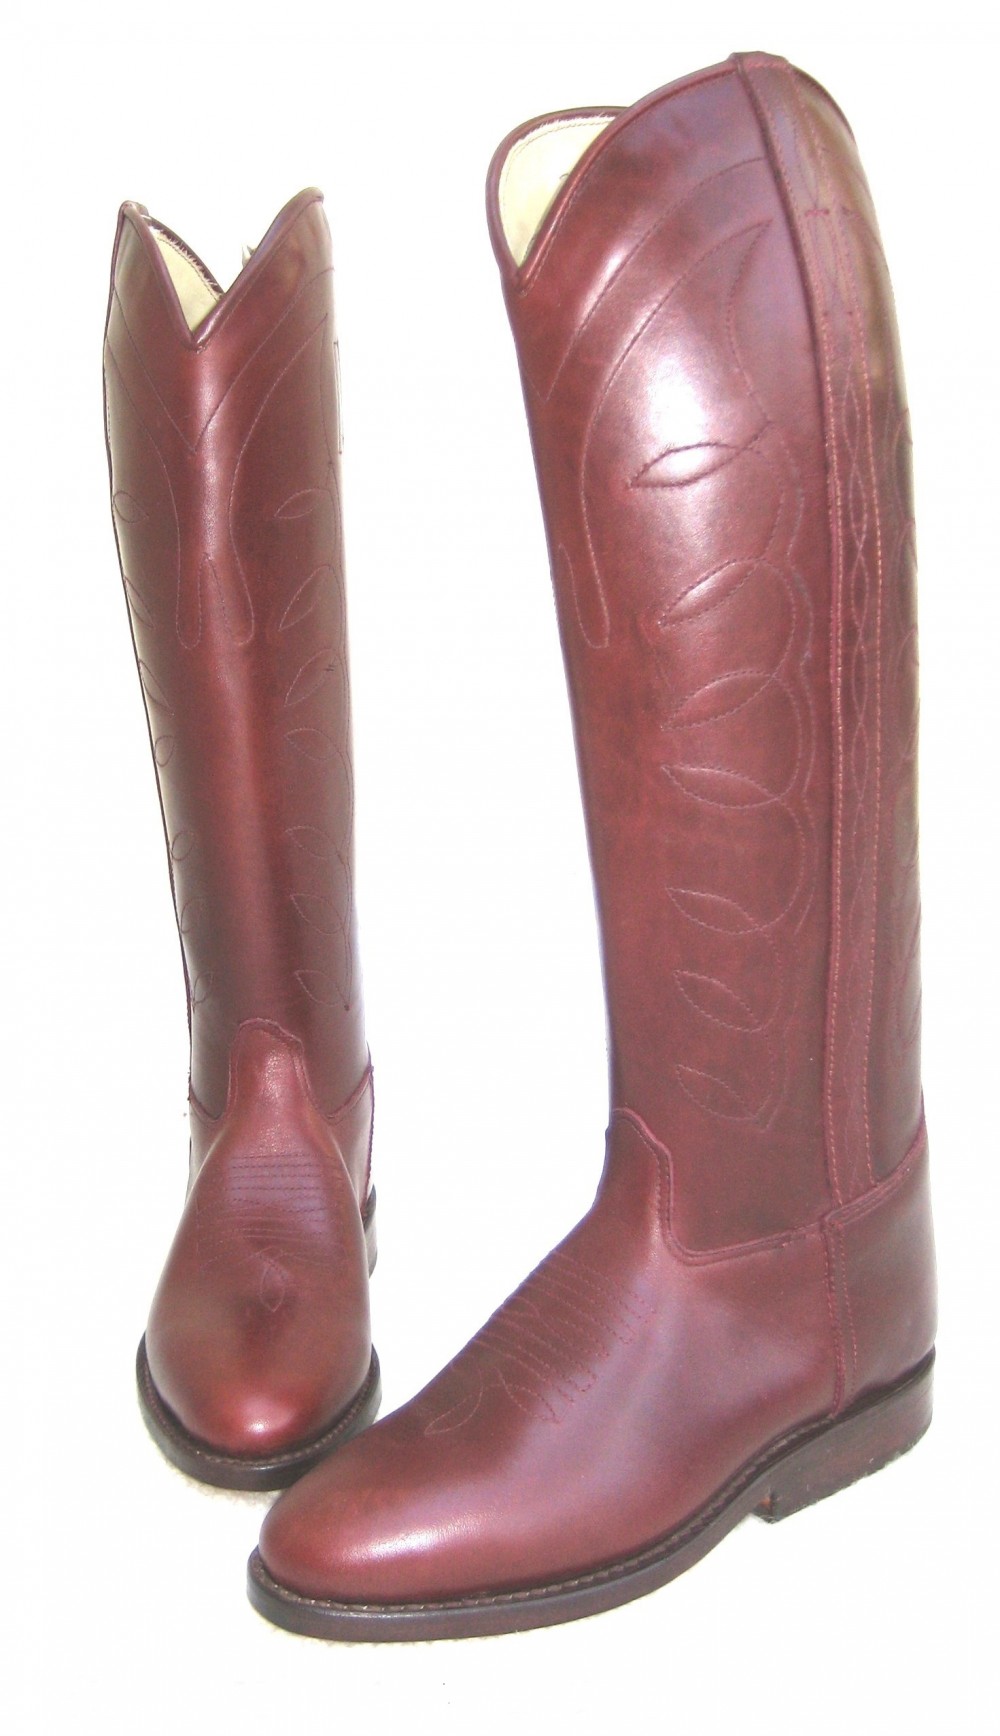 Texan style Argentine Polo boots